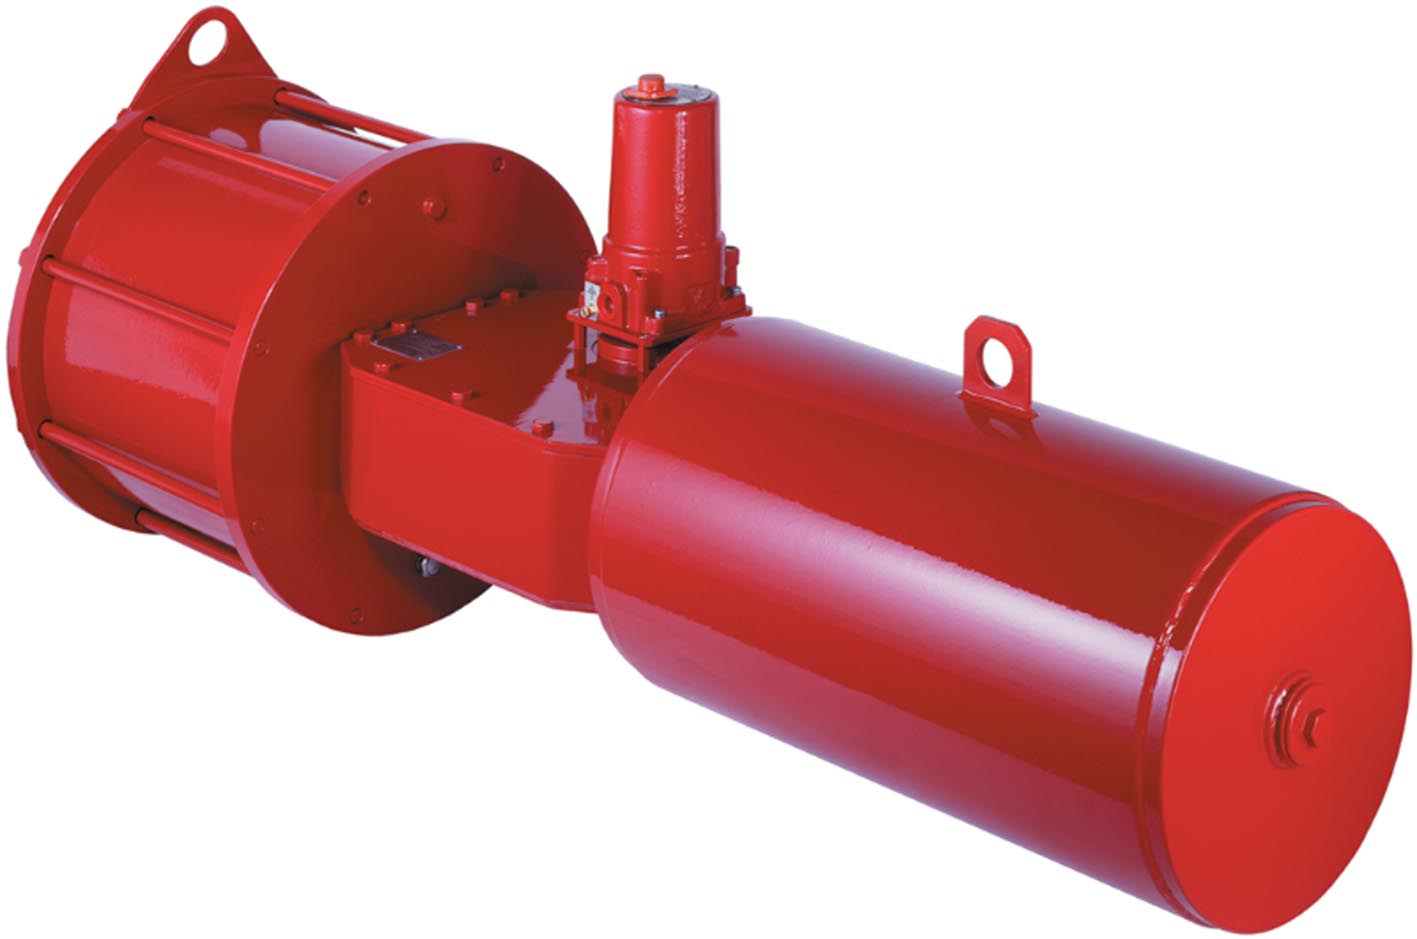 Rotork valve actuators ordered for "next generation" heavy oil upgrading plant in Canada